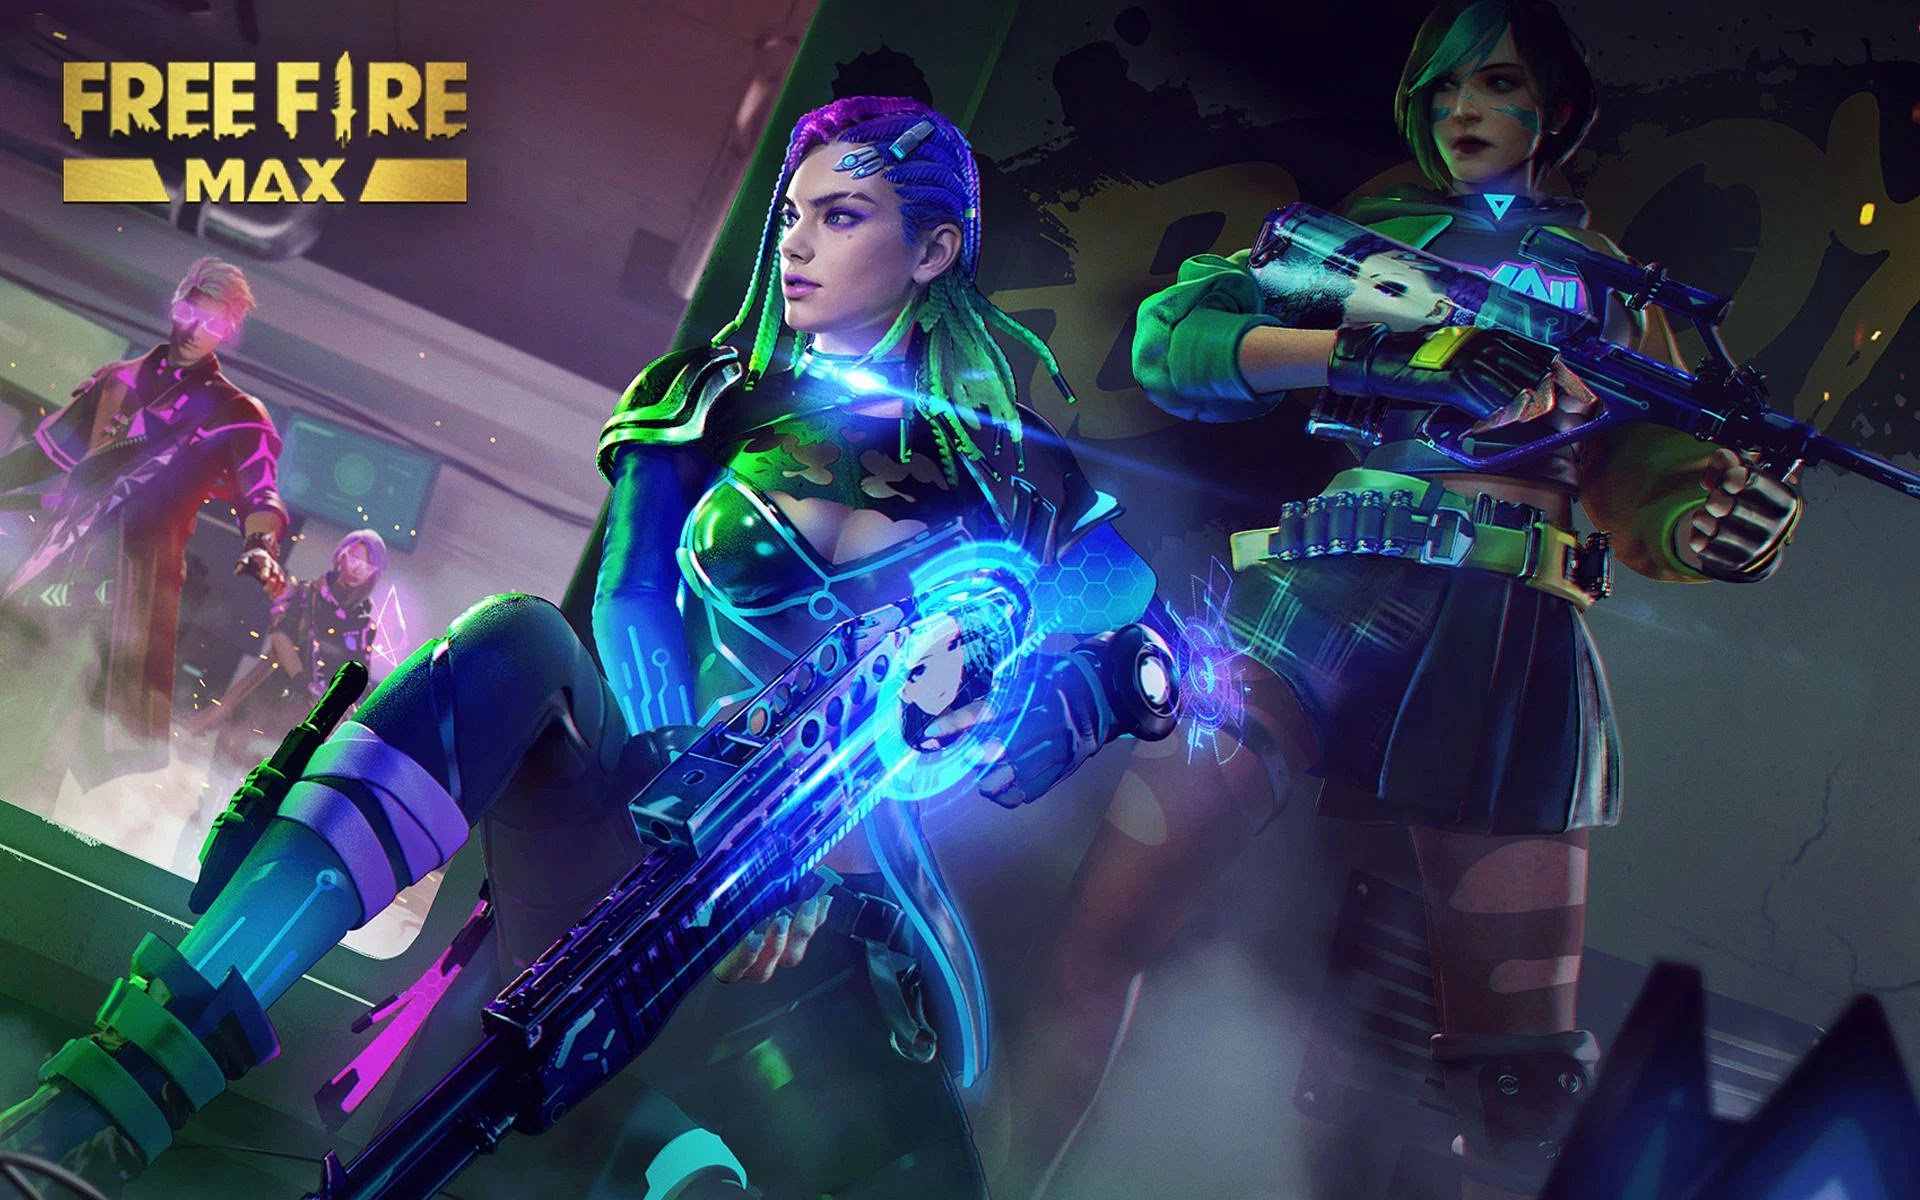 5 best female characters to get in Free Fire MAX Indian server (June 2022)